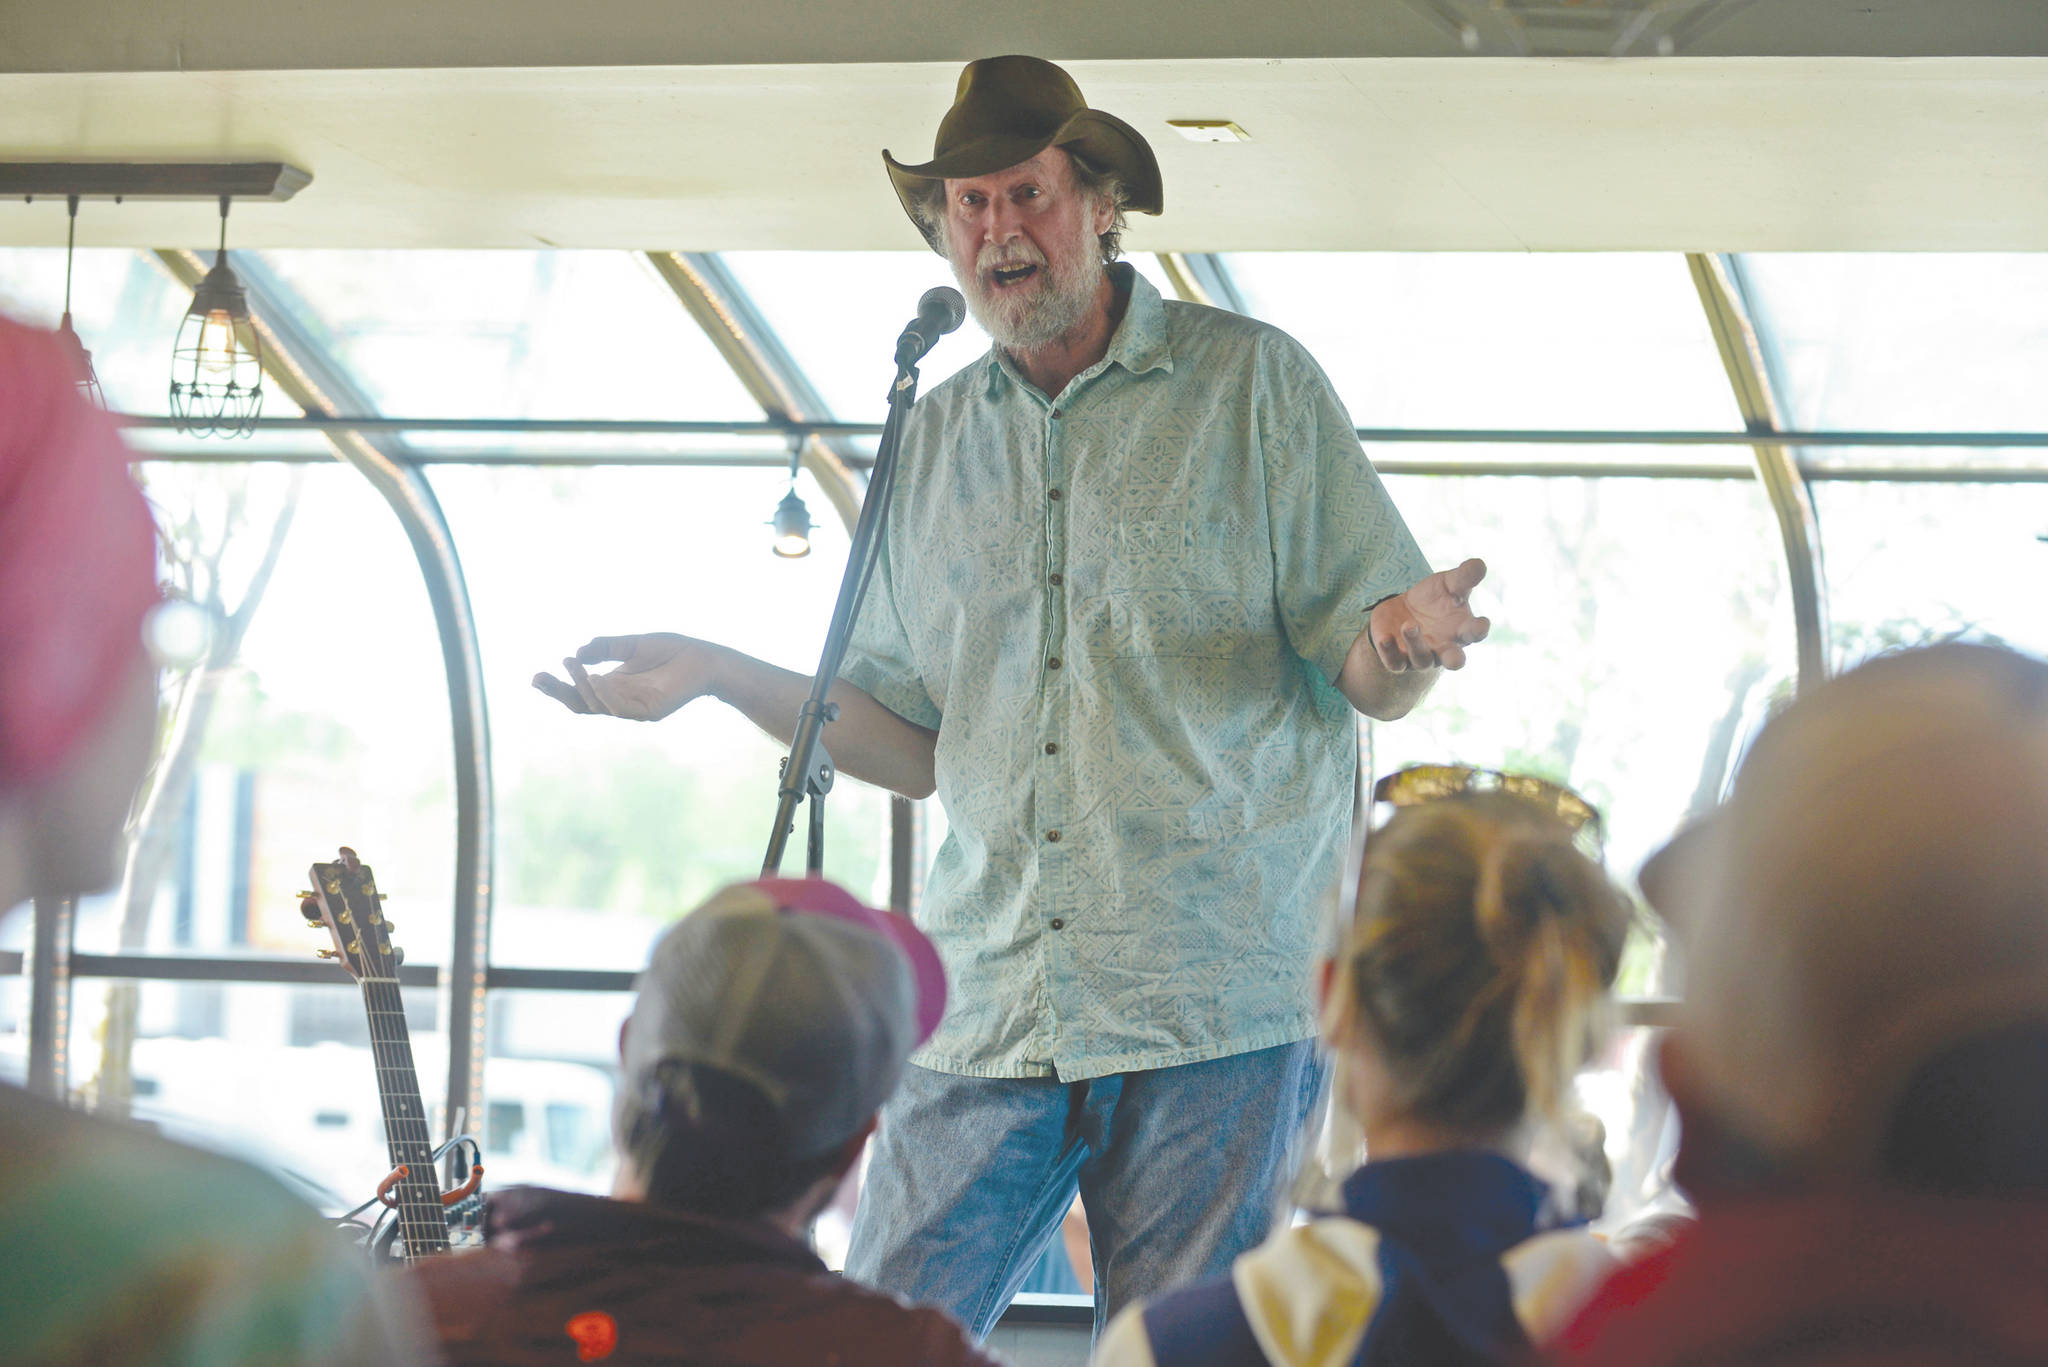 Ben Boettger/Peninsula Clarion file                                Bill Holt tells a fishing tale at Odie’s Deli on Friday, June 2, 2017, in Soldotna. Holt was among the seven storytellers in True Tales Told Live, an occasional storytelling event co-founded by Pegge Erkeneff, Jenny Neyman and Kaitlin Vadla.